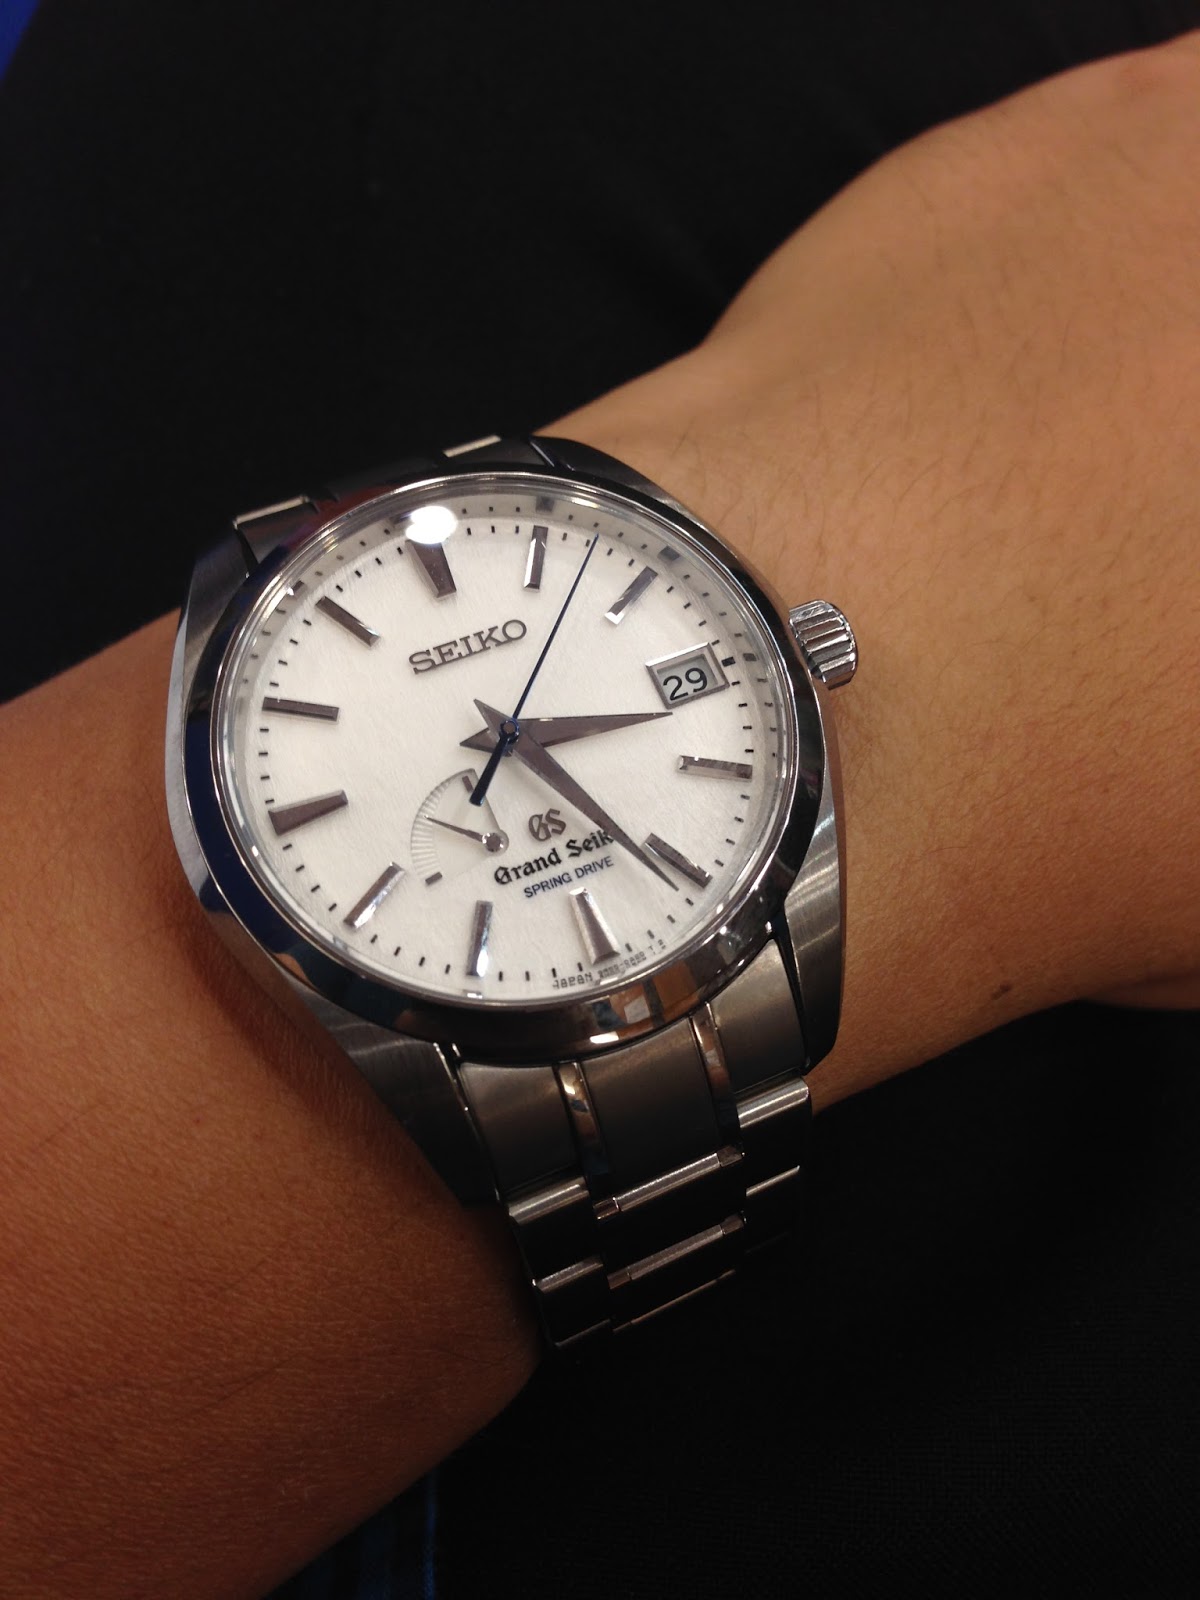 A Fortnight Review 2 Weeks With Seiko S Grand Seiko Sbga011 Spring Drive Snowflake Watch